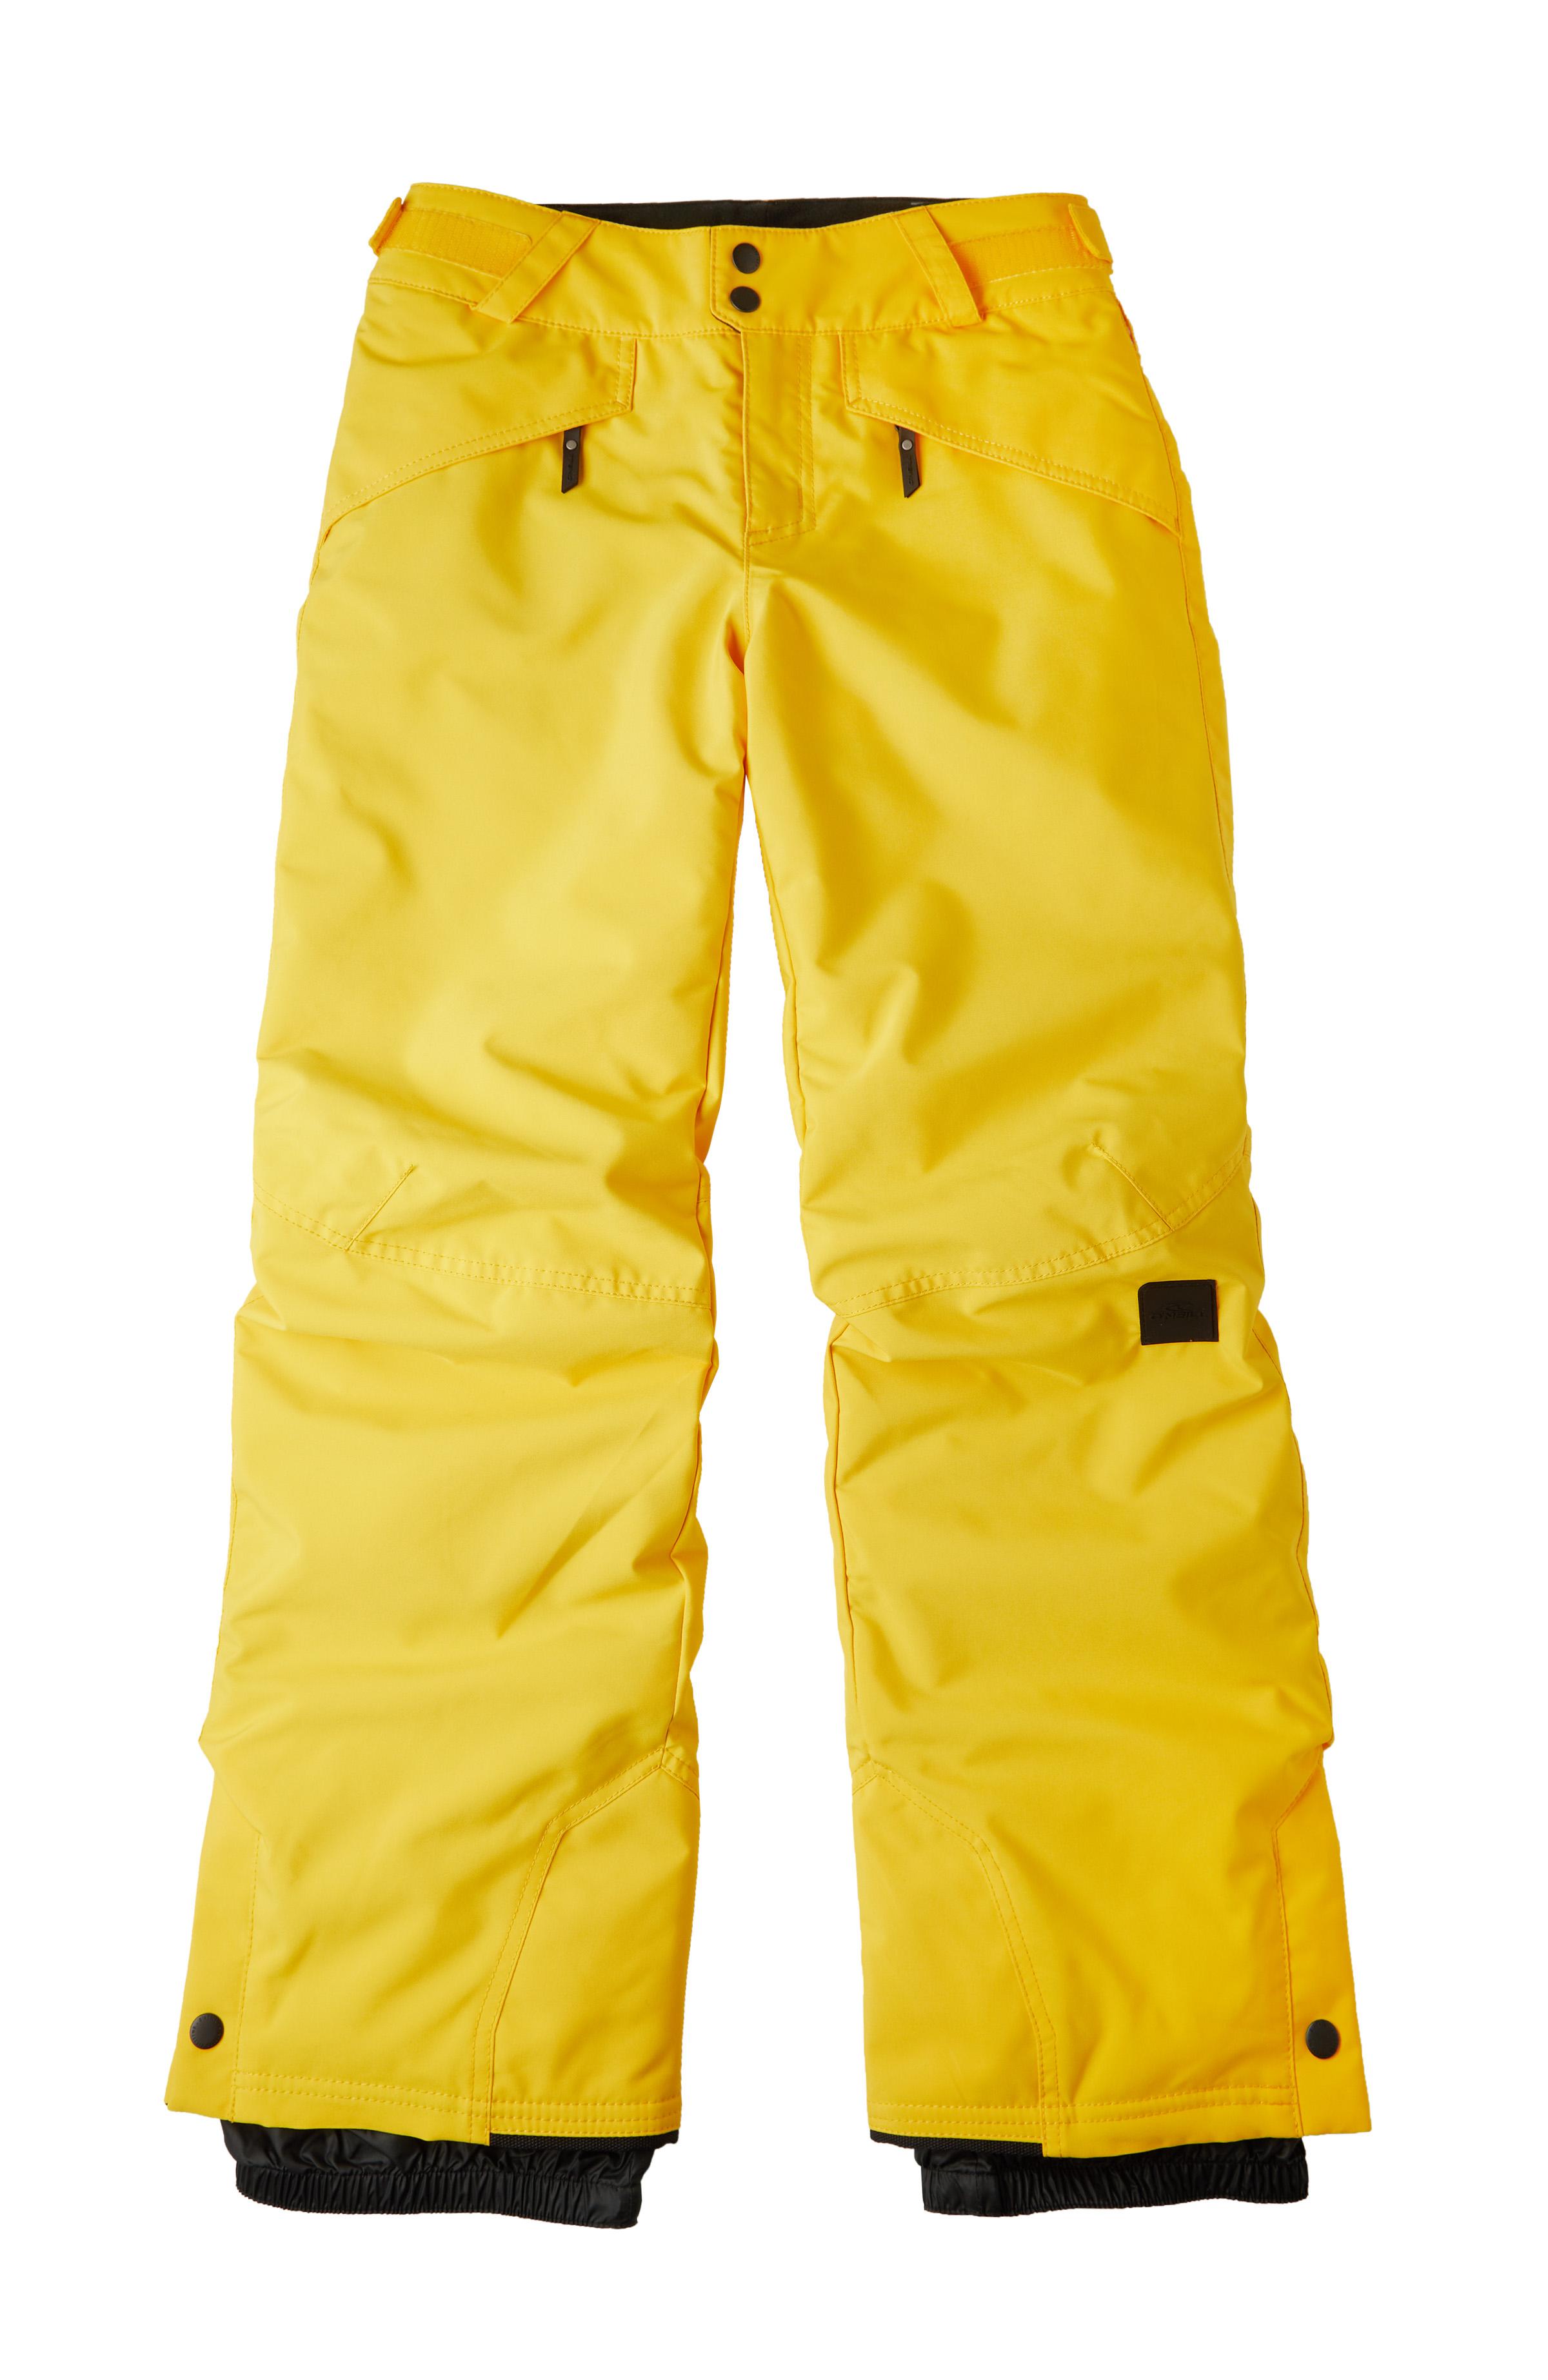 Image of O'NEILL Anvil Snowboardhose Jungen